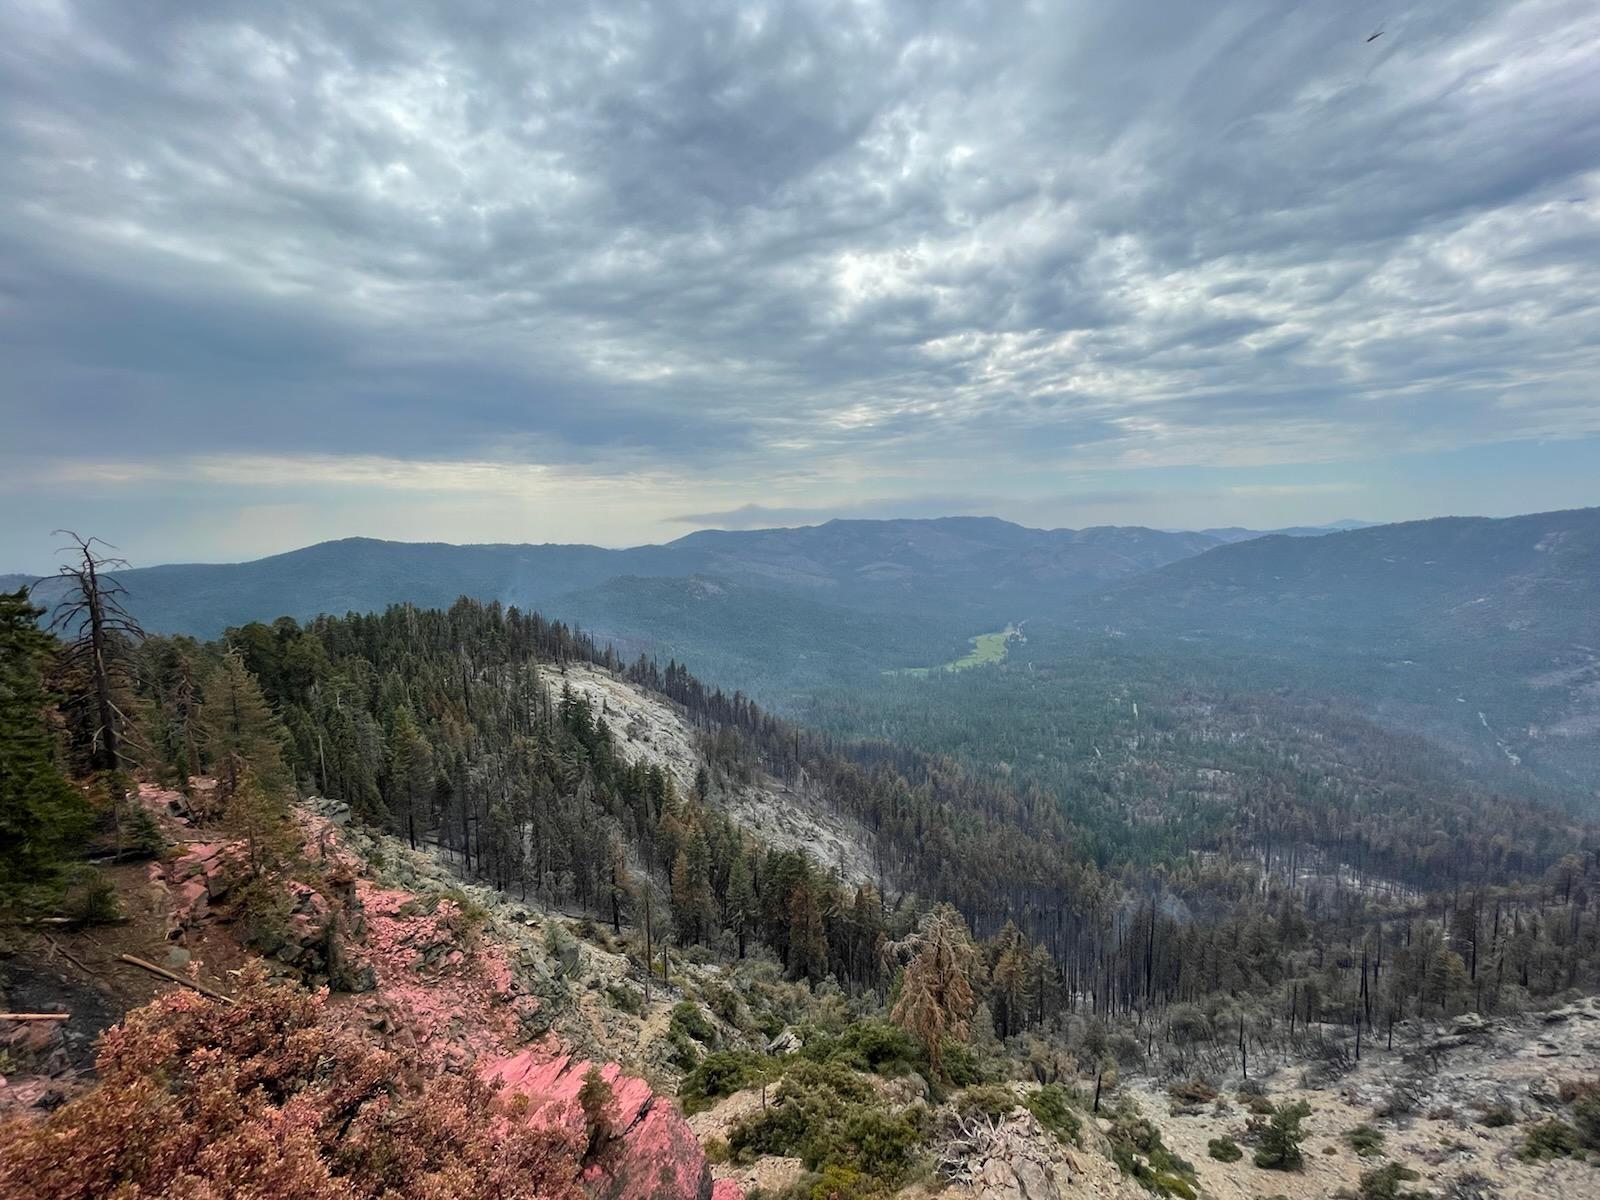 This image shows a mosiac of burned and unburned timber looking down onto Wawona from a high overlook